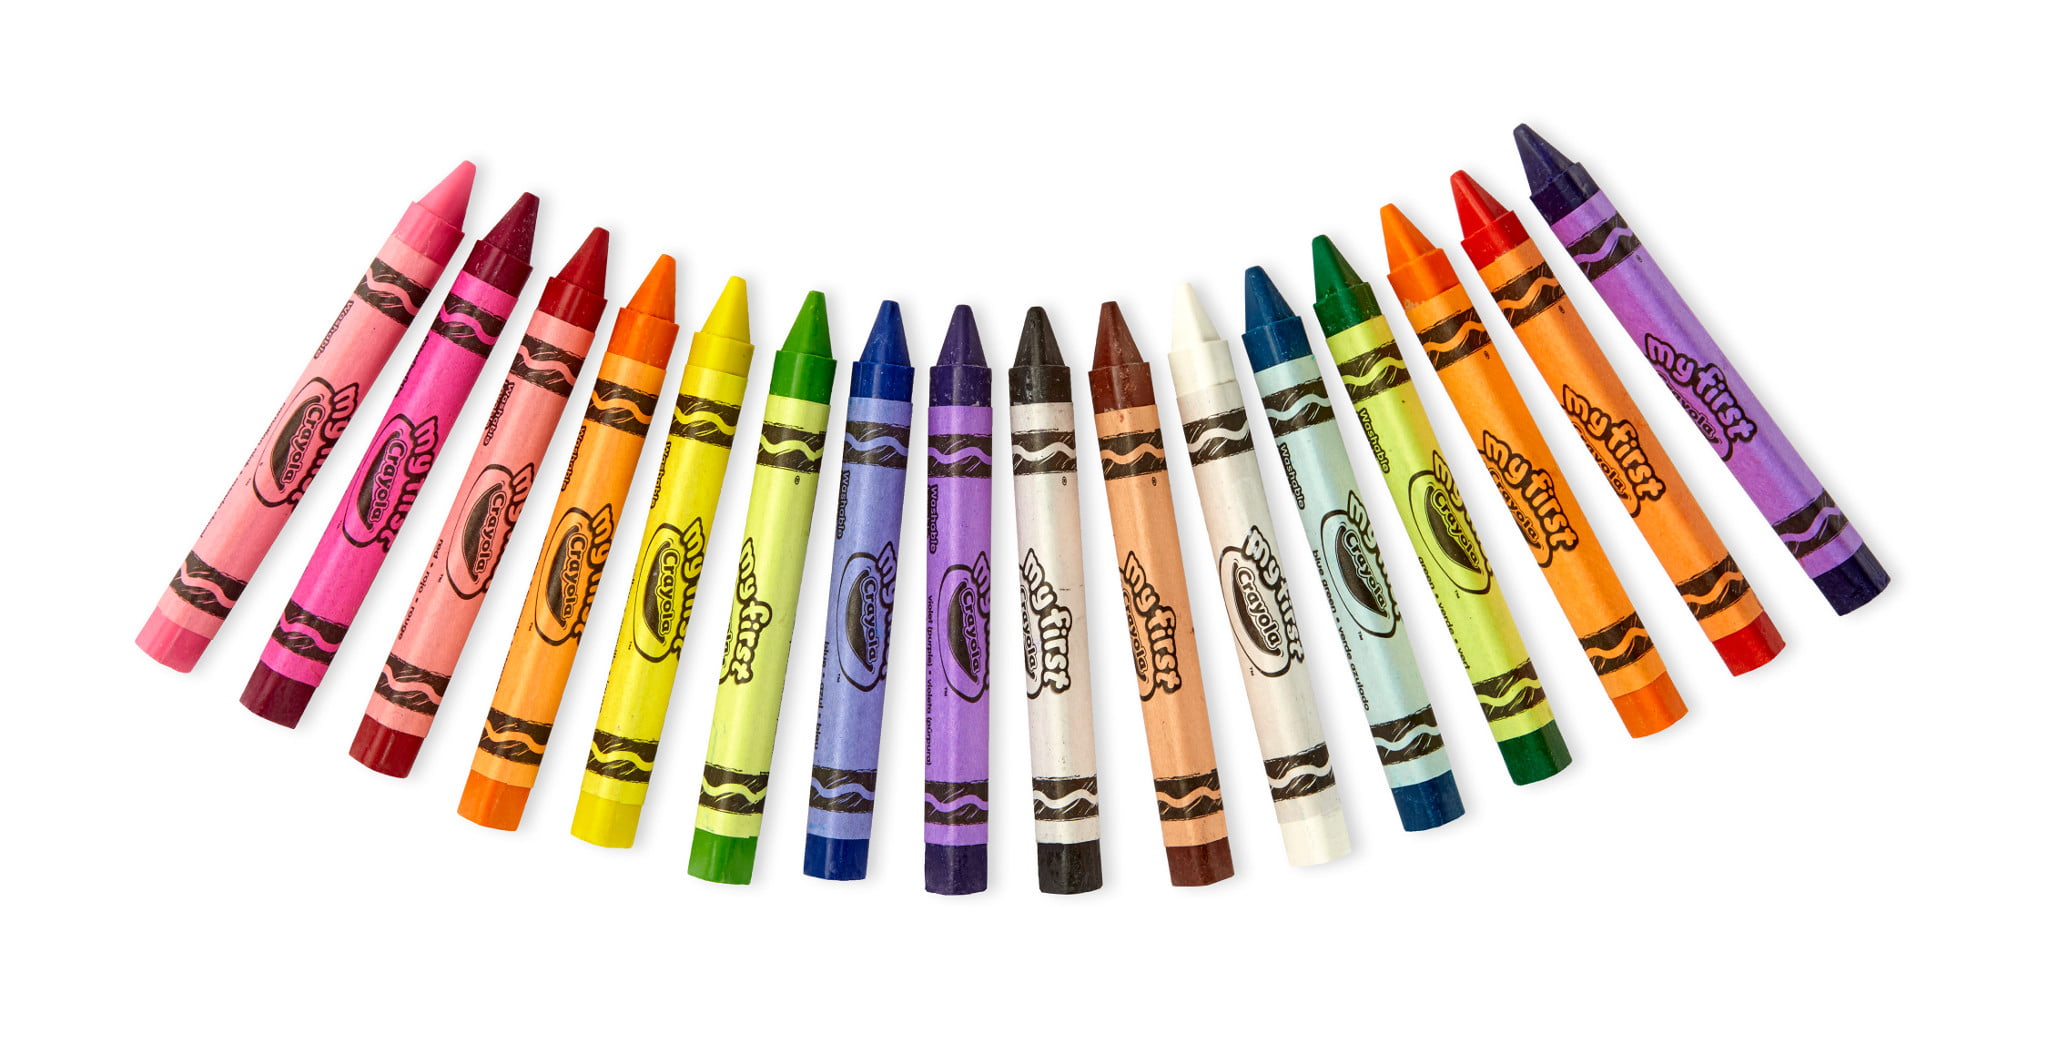 Crayola Young Kids Washable Tripod Crayons Assorted Colors Pack Of